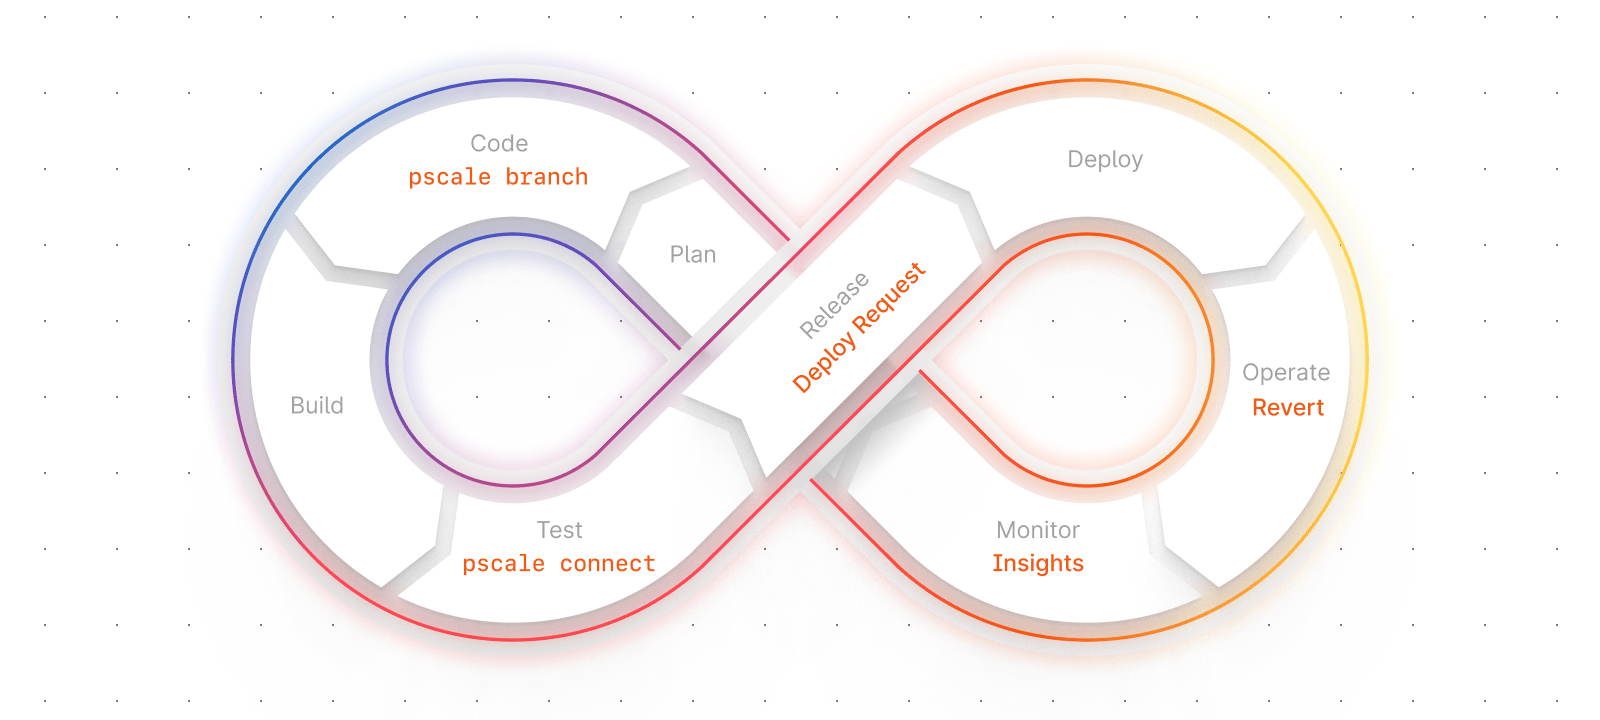 The eight phases of DevOps